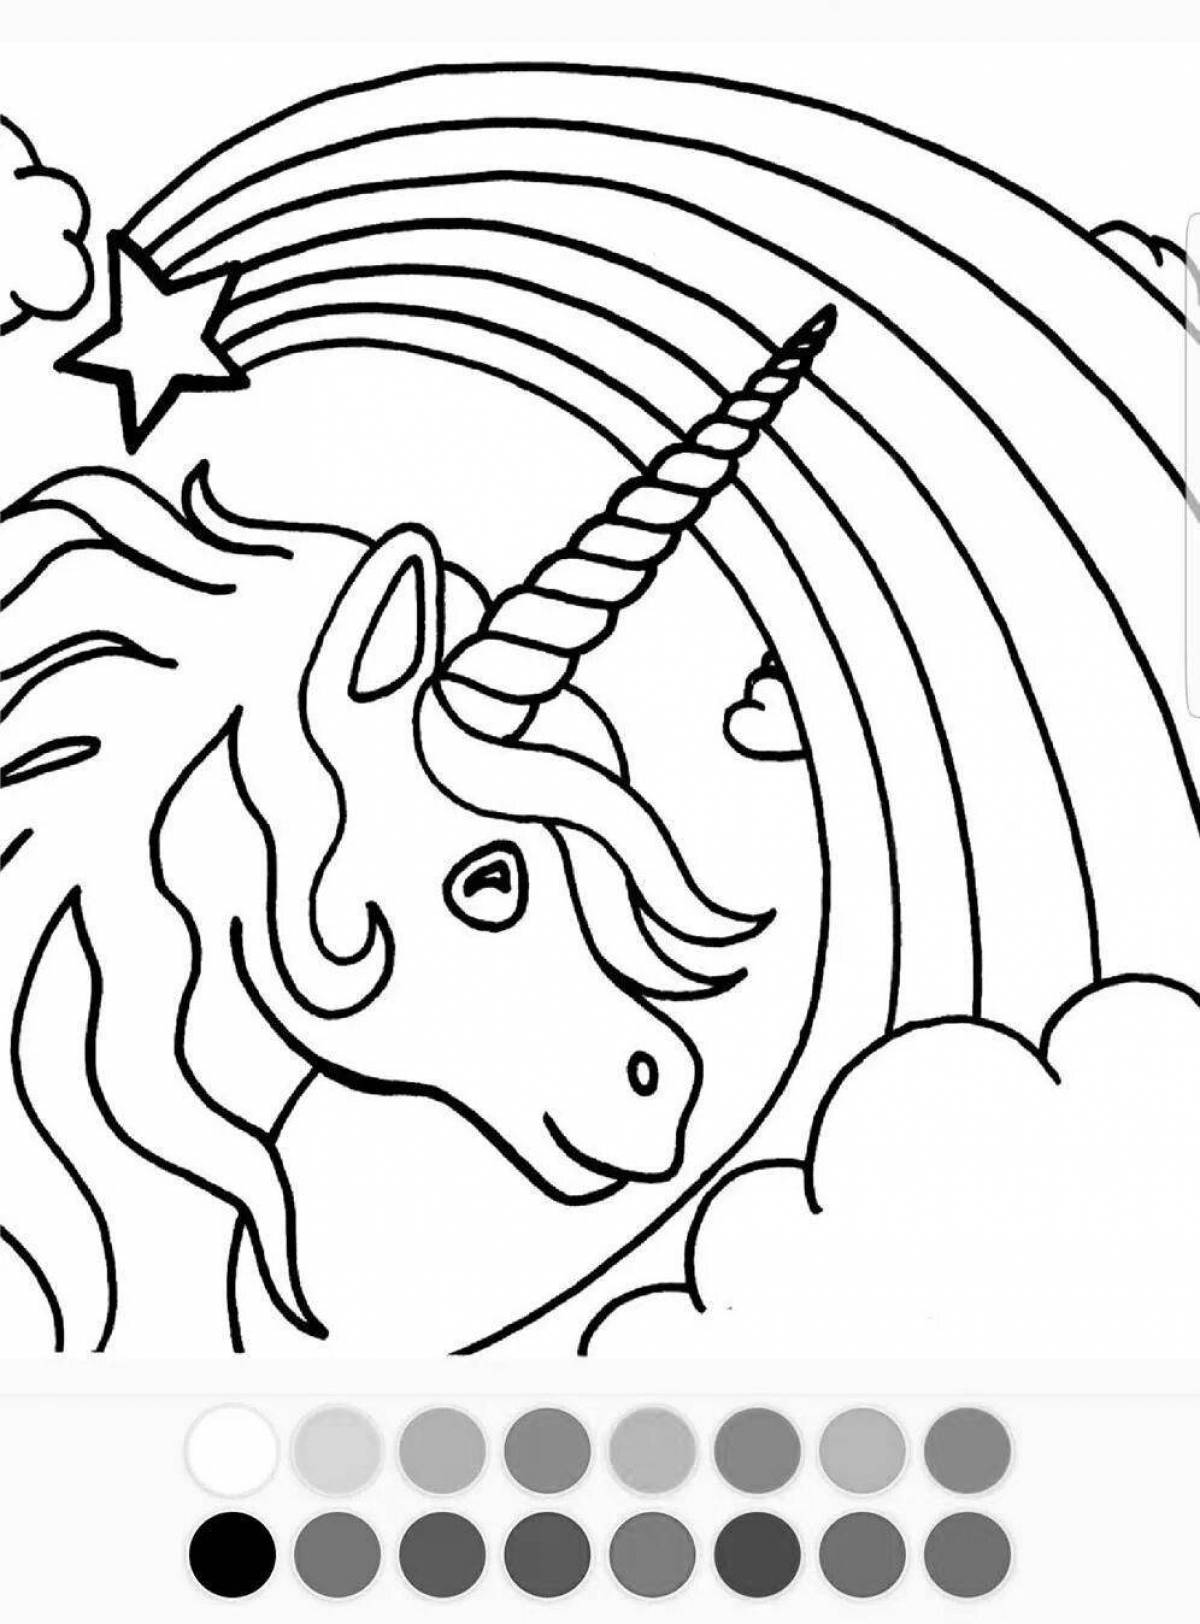 Radiant coloring page include unicorns